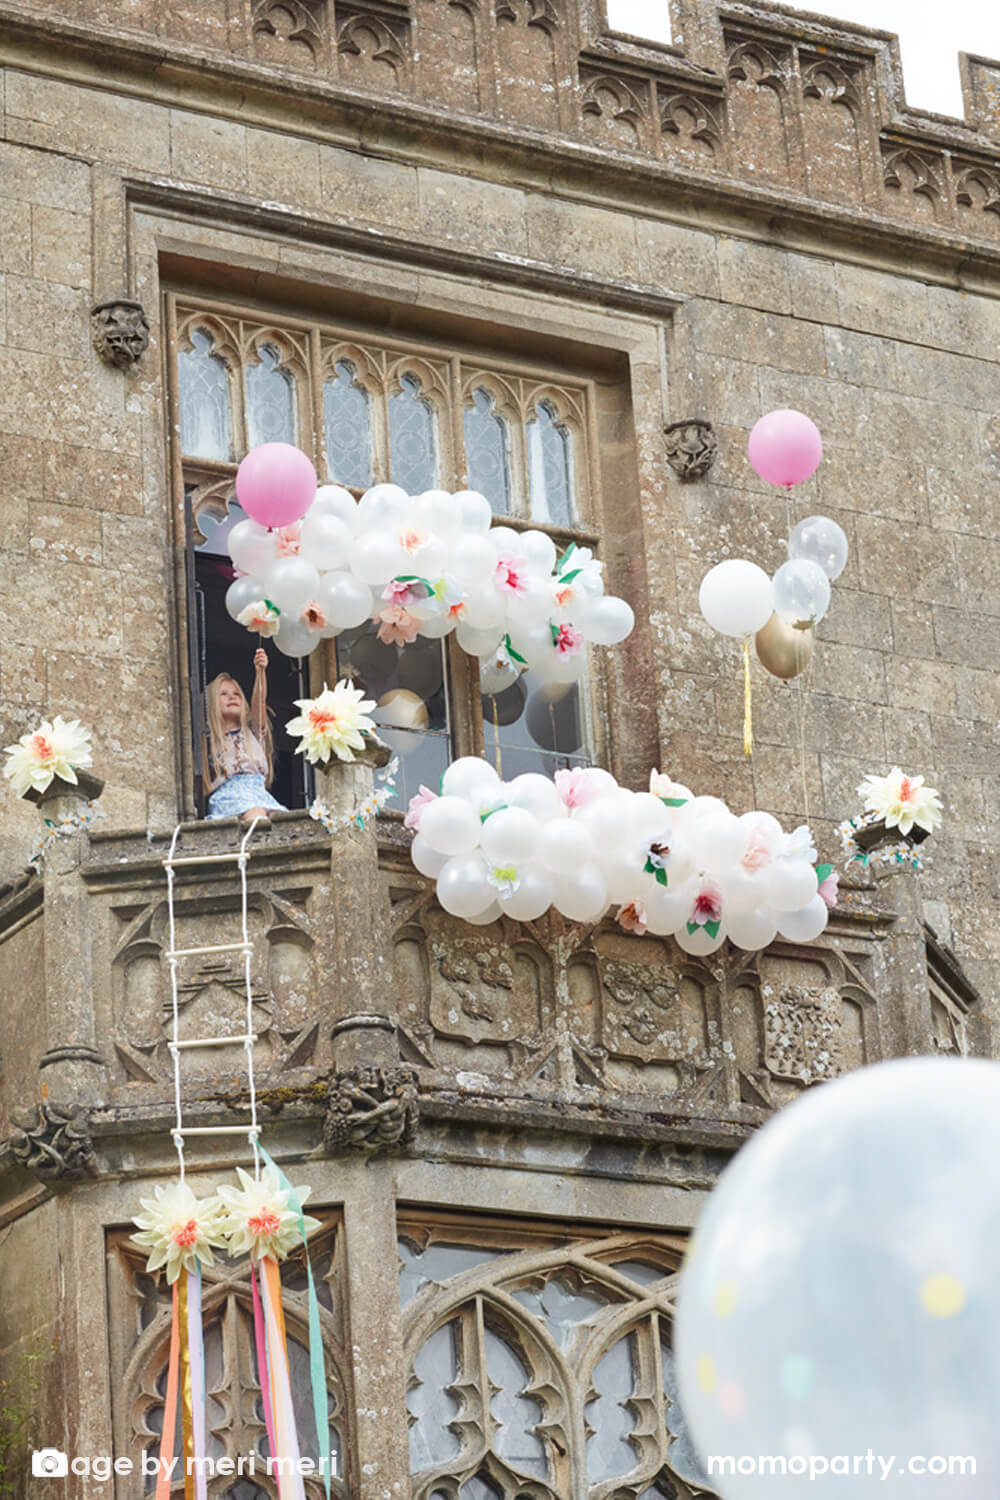 A girl standing on the balcony of a whimsical castle looking building that is decorated with Meri Meri Floral Balloon Garland made with pearl balloons and paper flowers which are crafted from pink, peach, yellow and white tissue paper with golden foil centers.